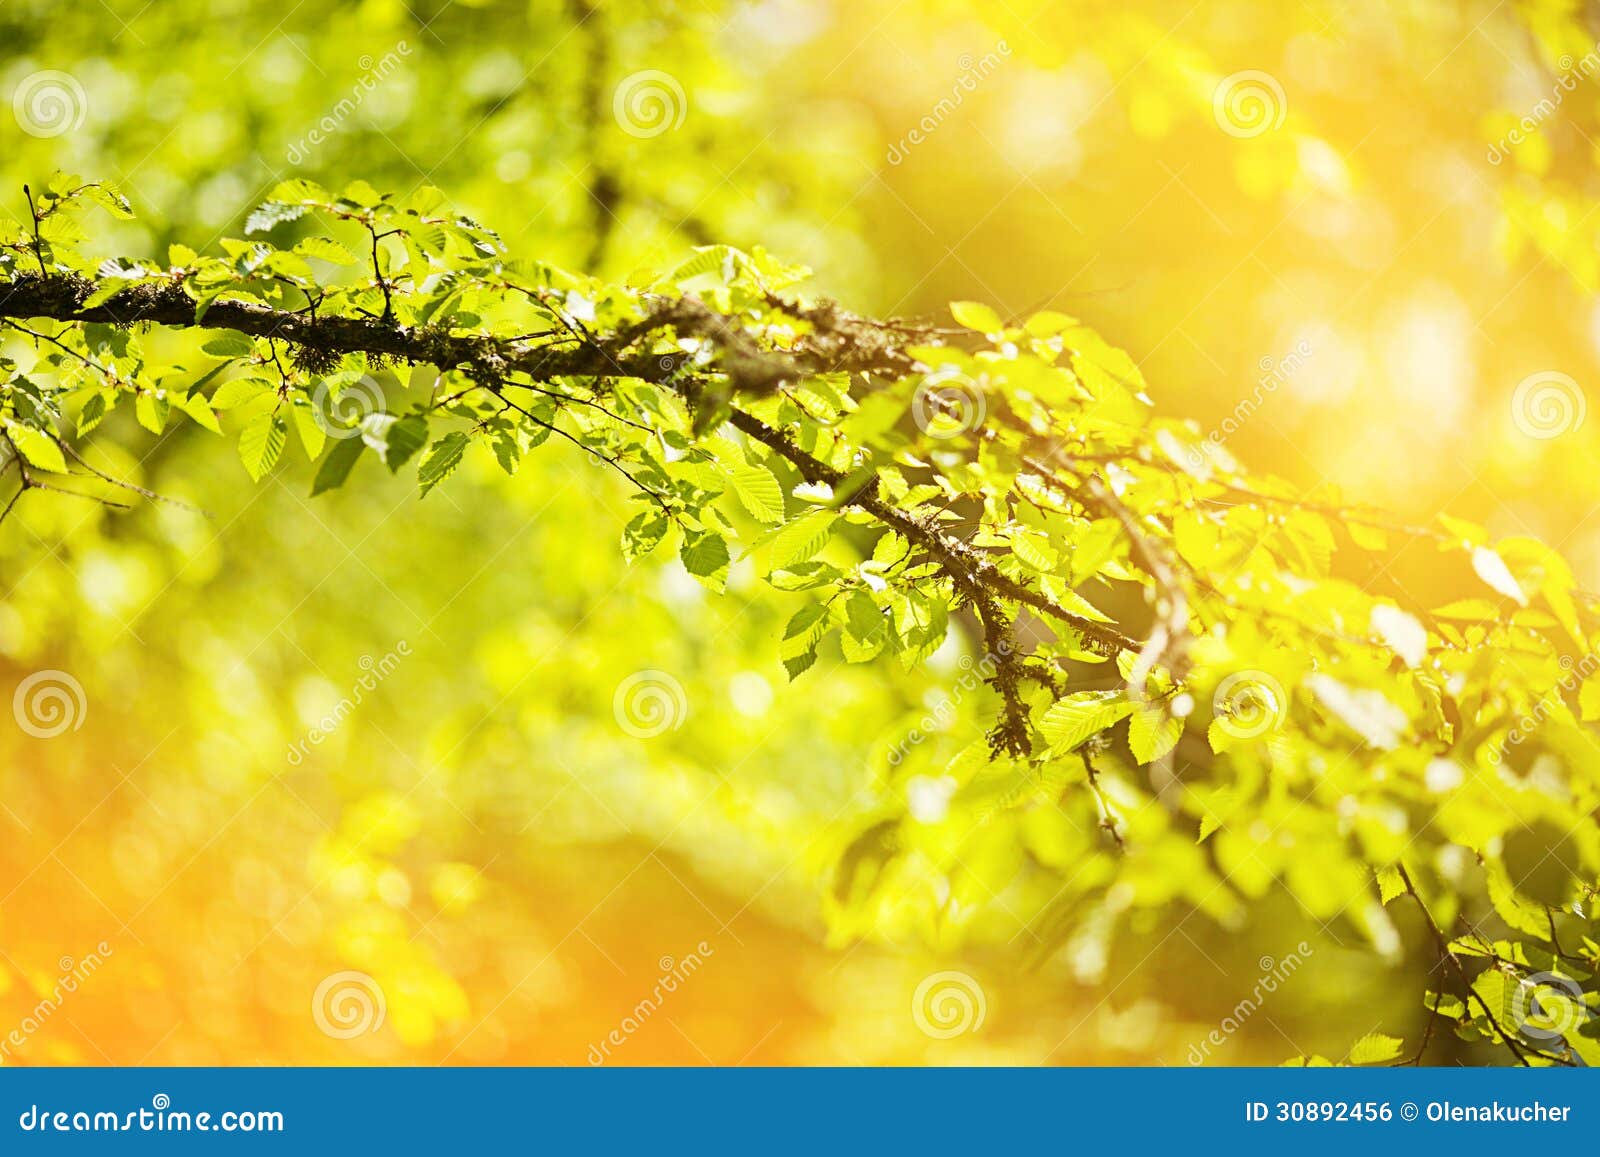 Spring colors stock photo. Image of outdoors, background - 30892456